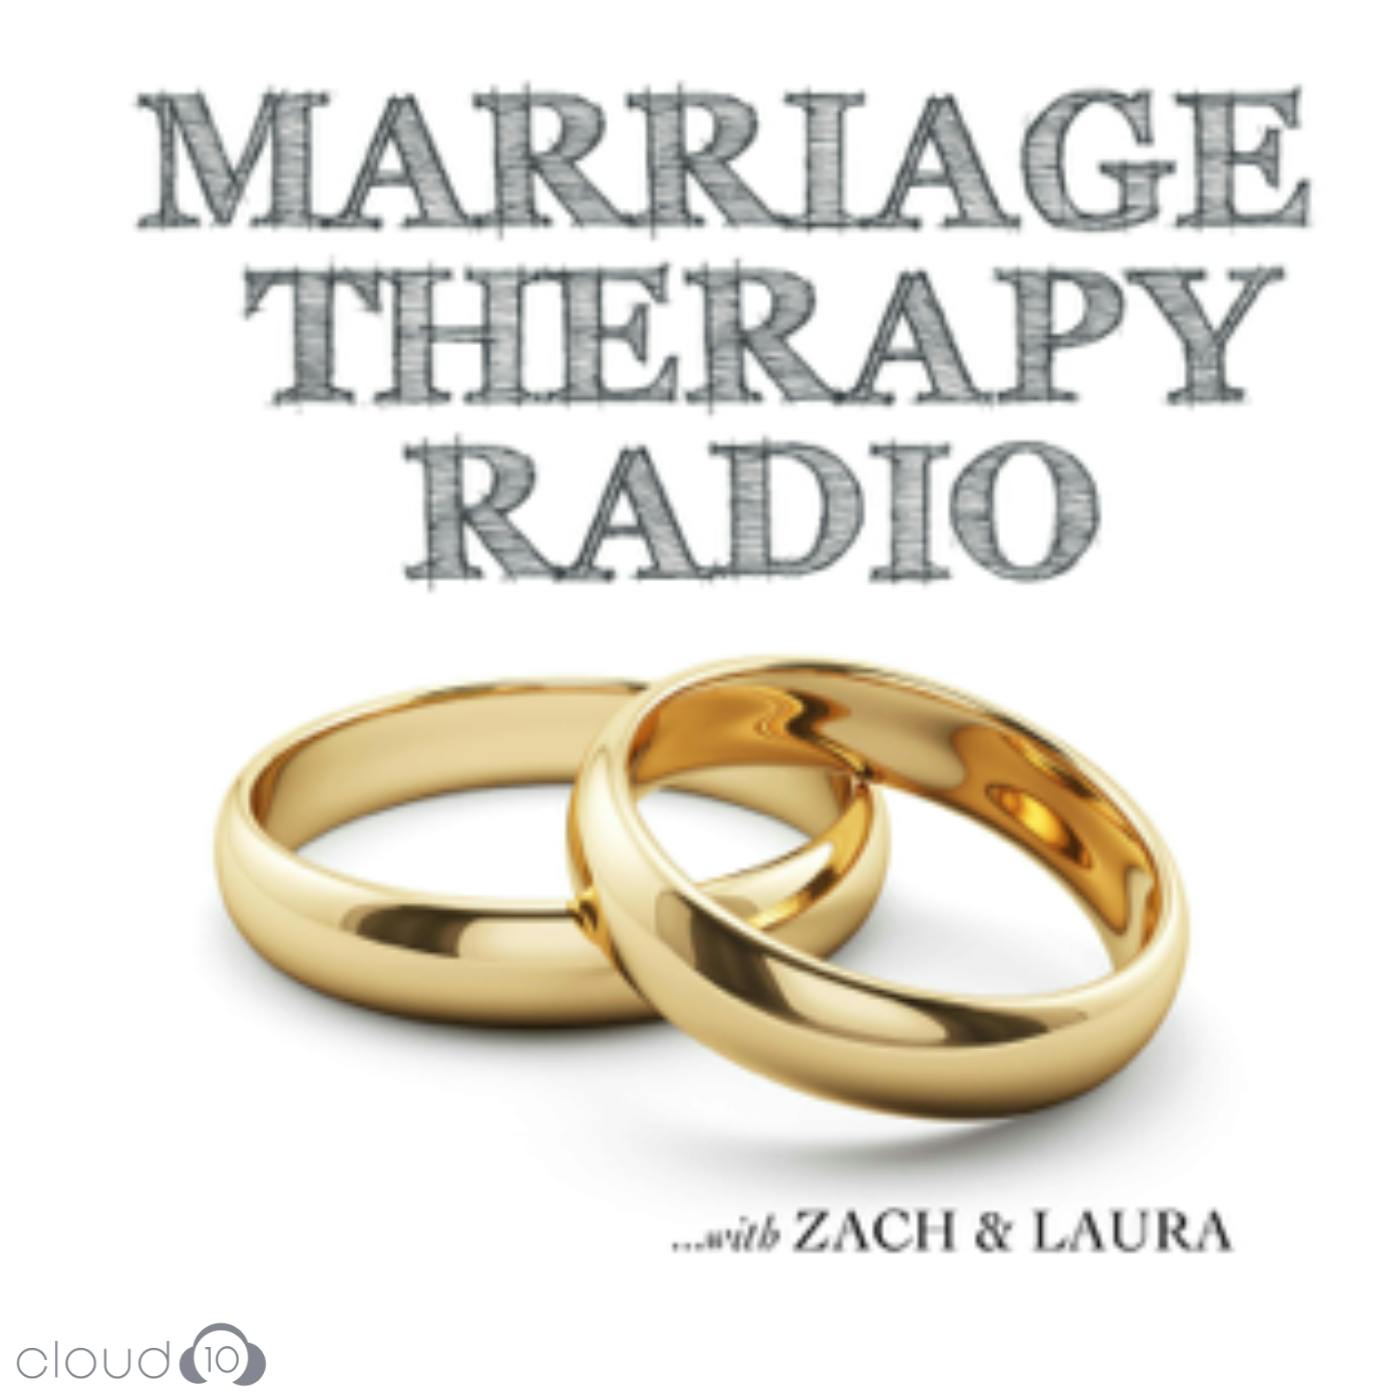 Marriage Therapy Radio podcast